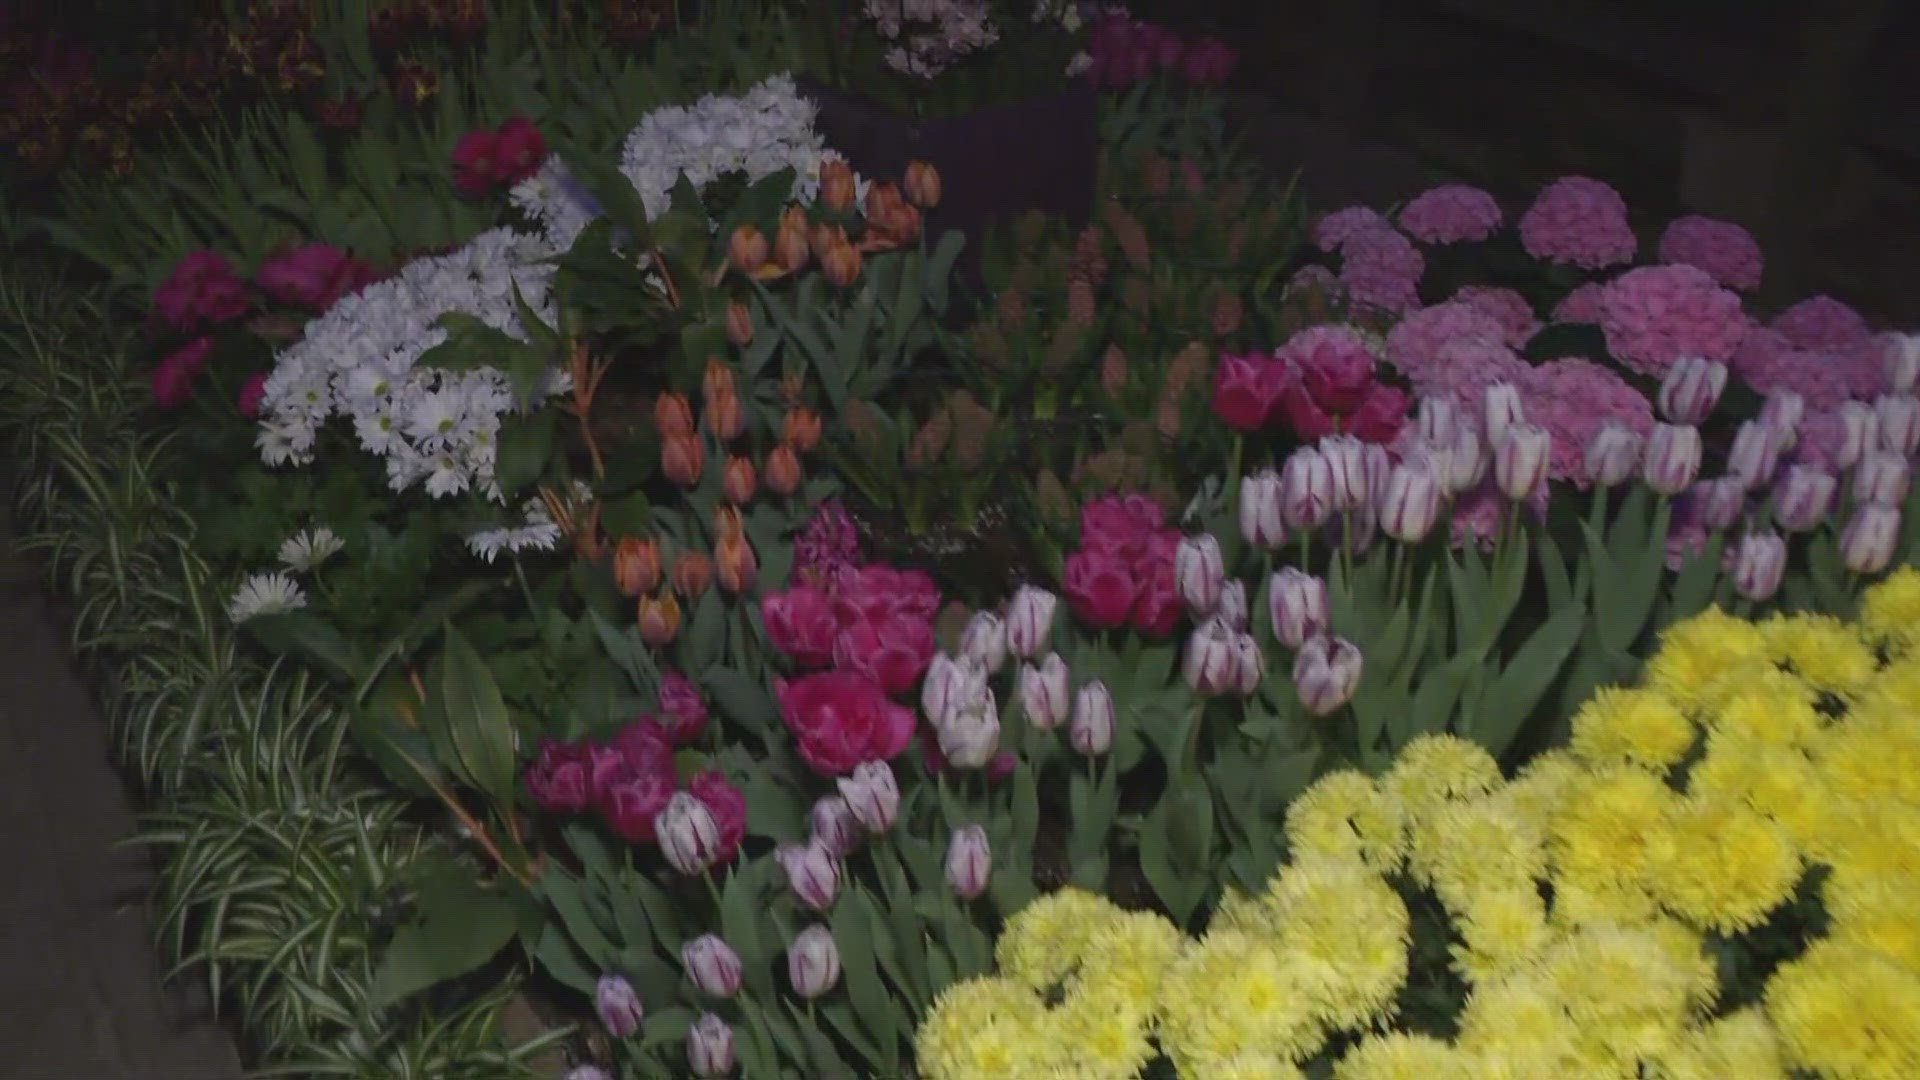 Kevin O'Neill visits the Botanical Garden to celebrate spring and Easter